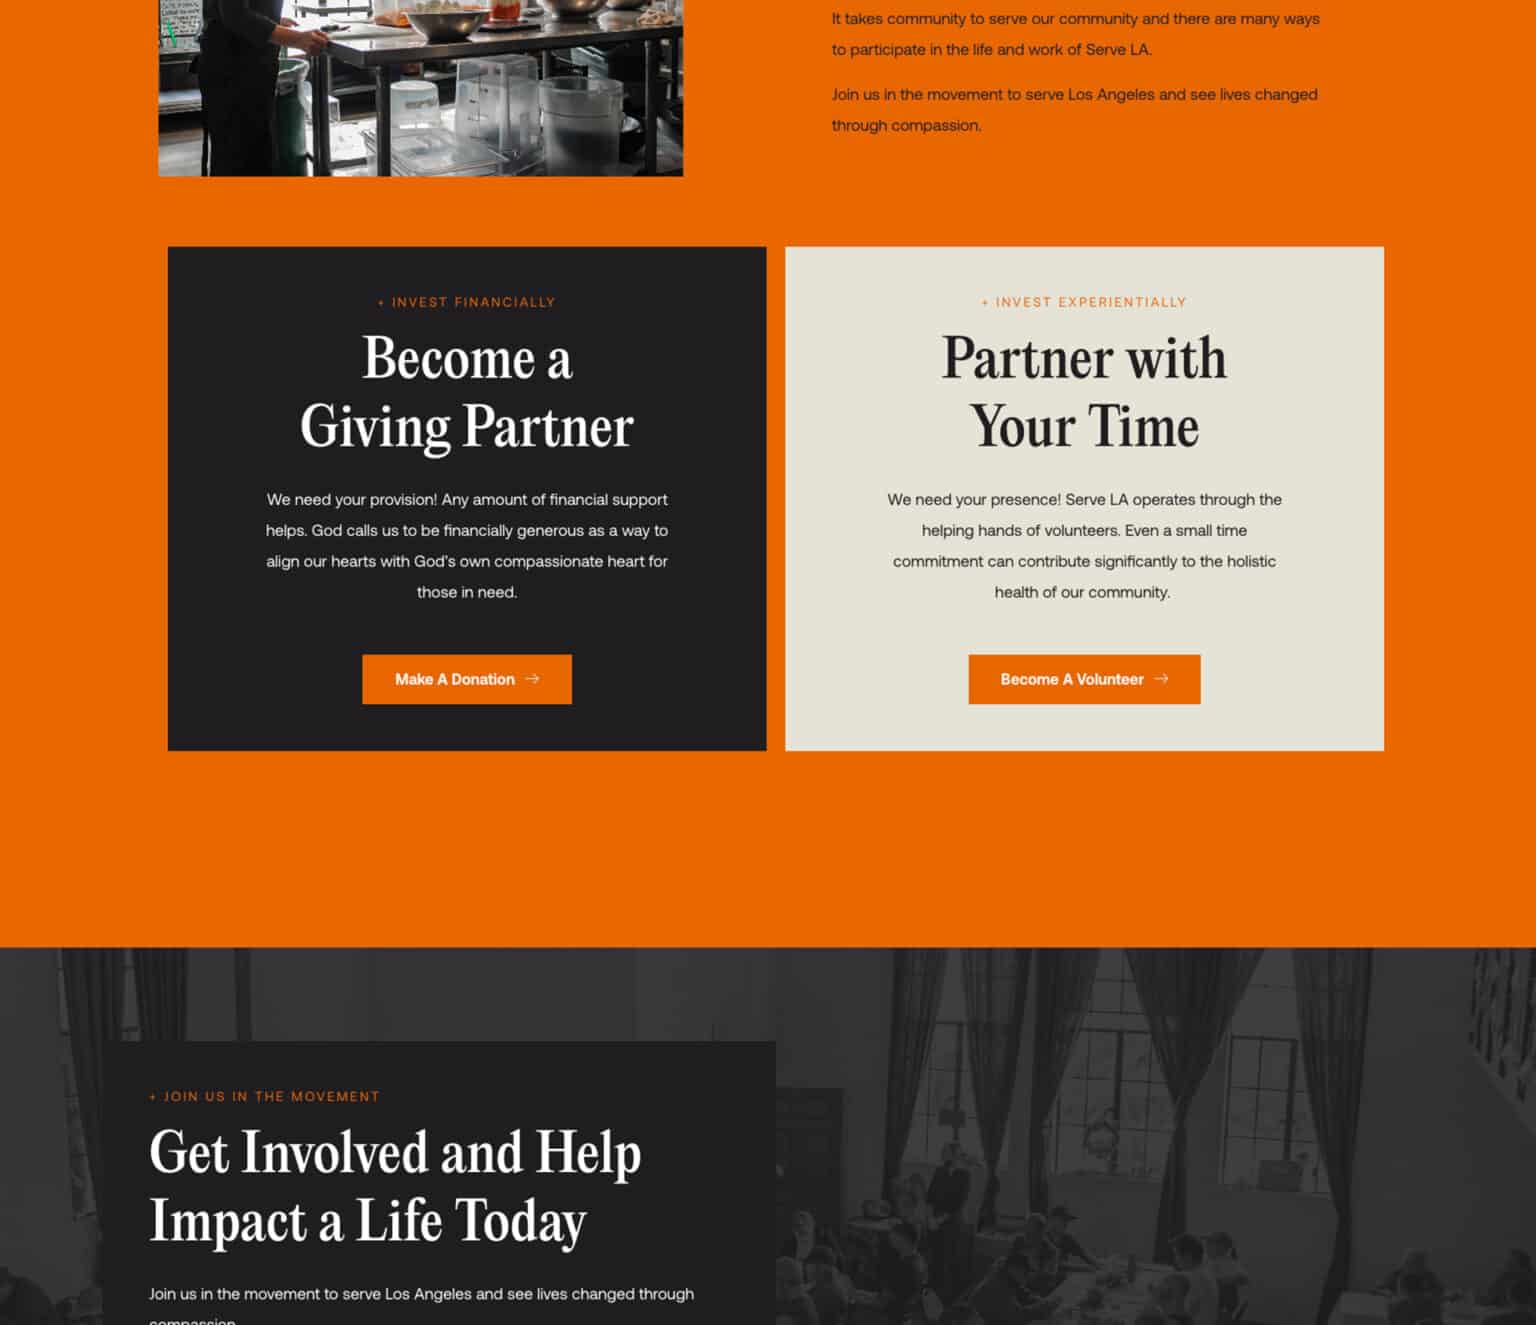 Website interface showing options to "invest financially" and "invest experientially" in a community movement, with a call to action for donations and volunteering.